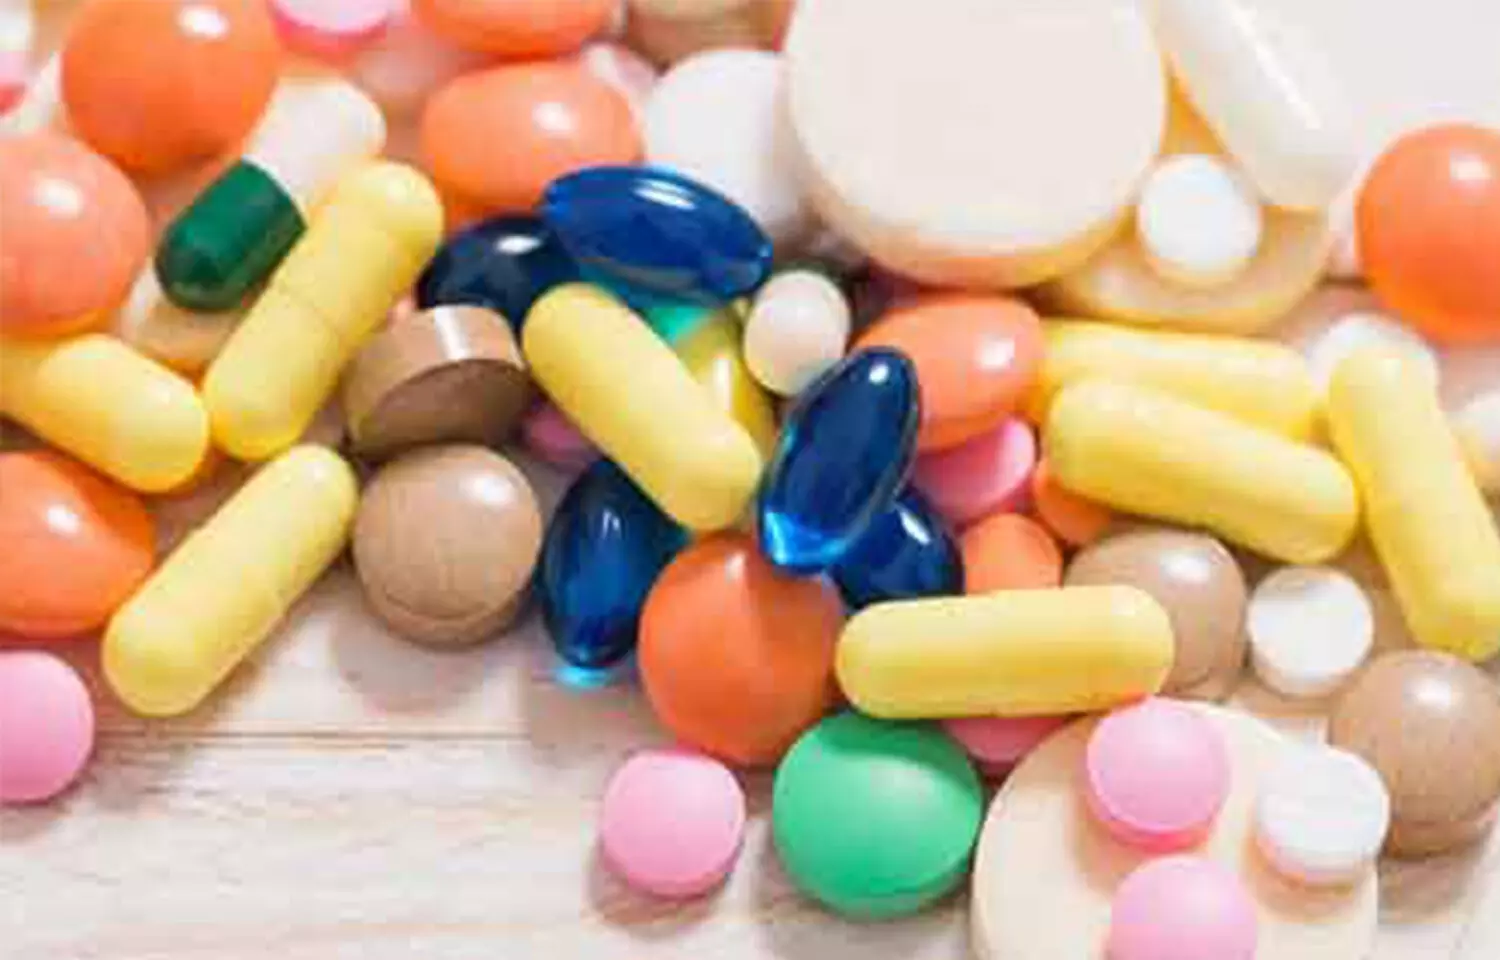 NPPA fixes retail prices of 15 formulations, ceiling price of Framycetin